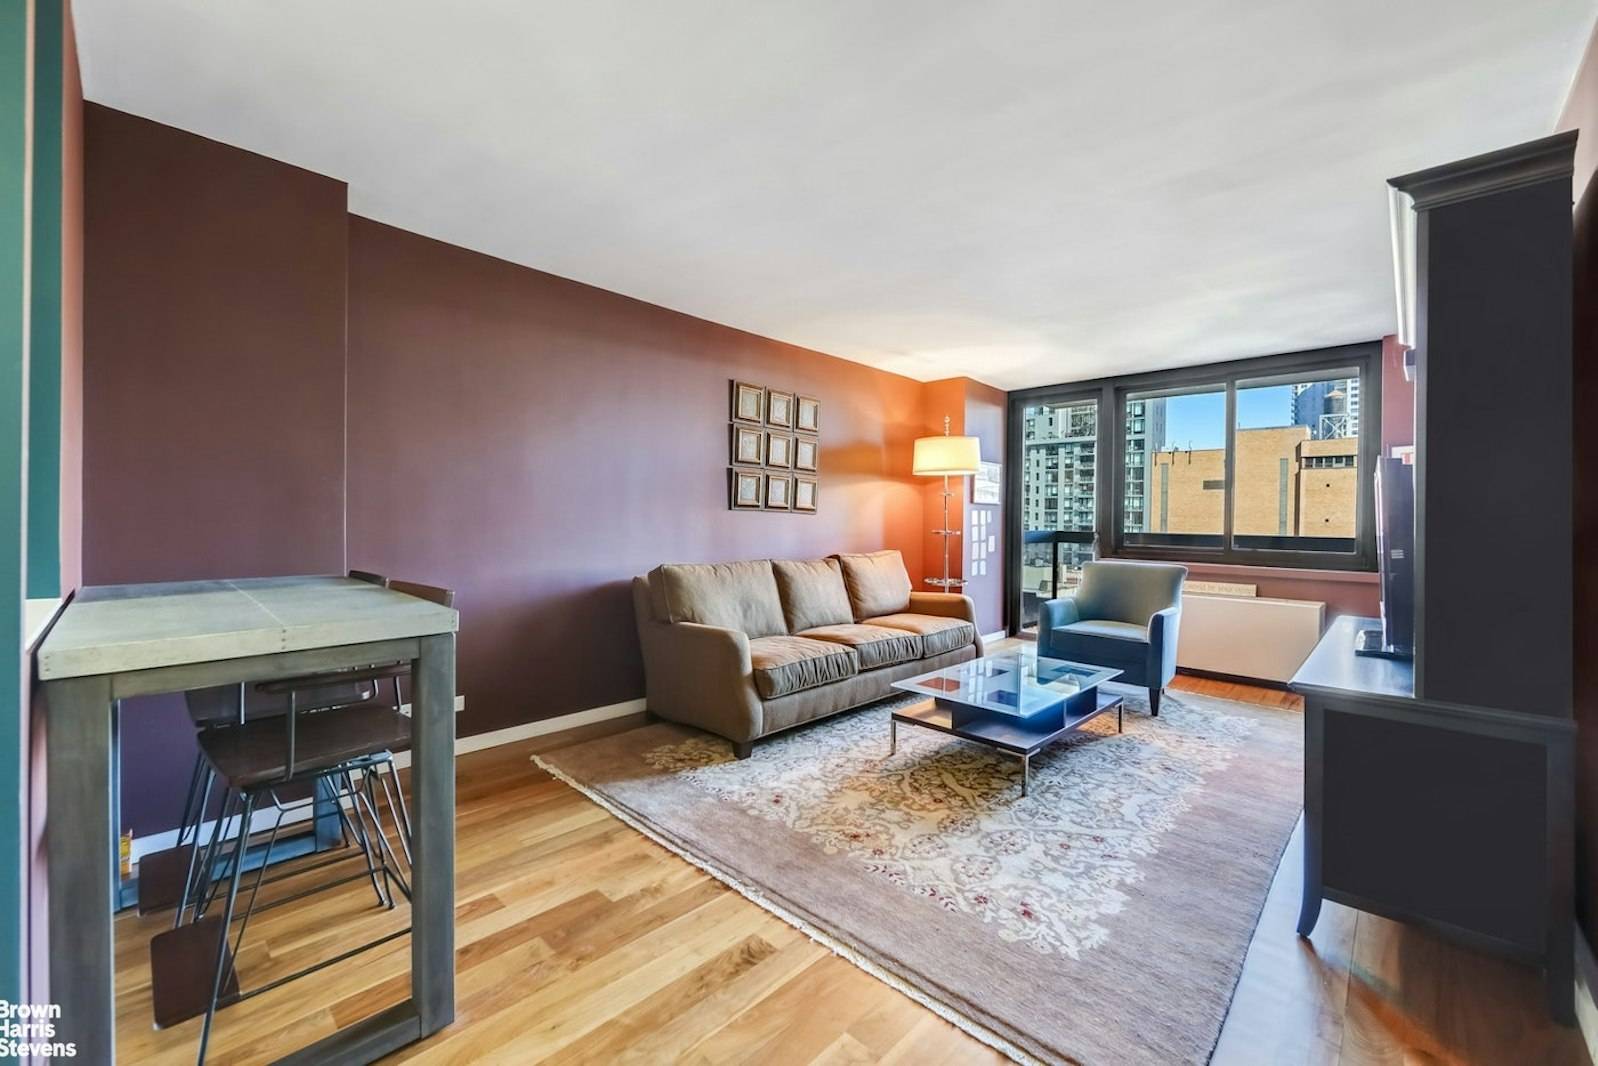 Move right in to this luxurious, spacious one bedroom flat in a prime upper eastside location.